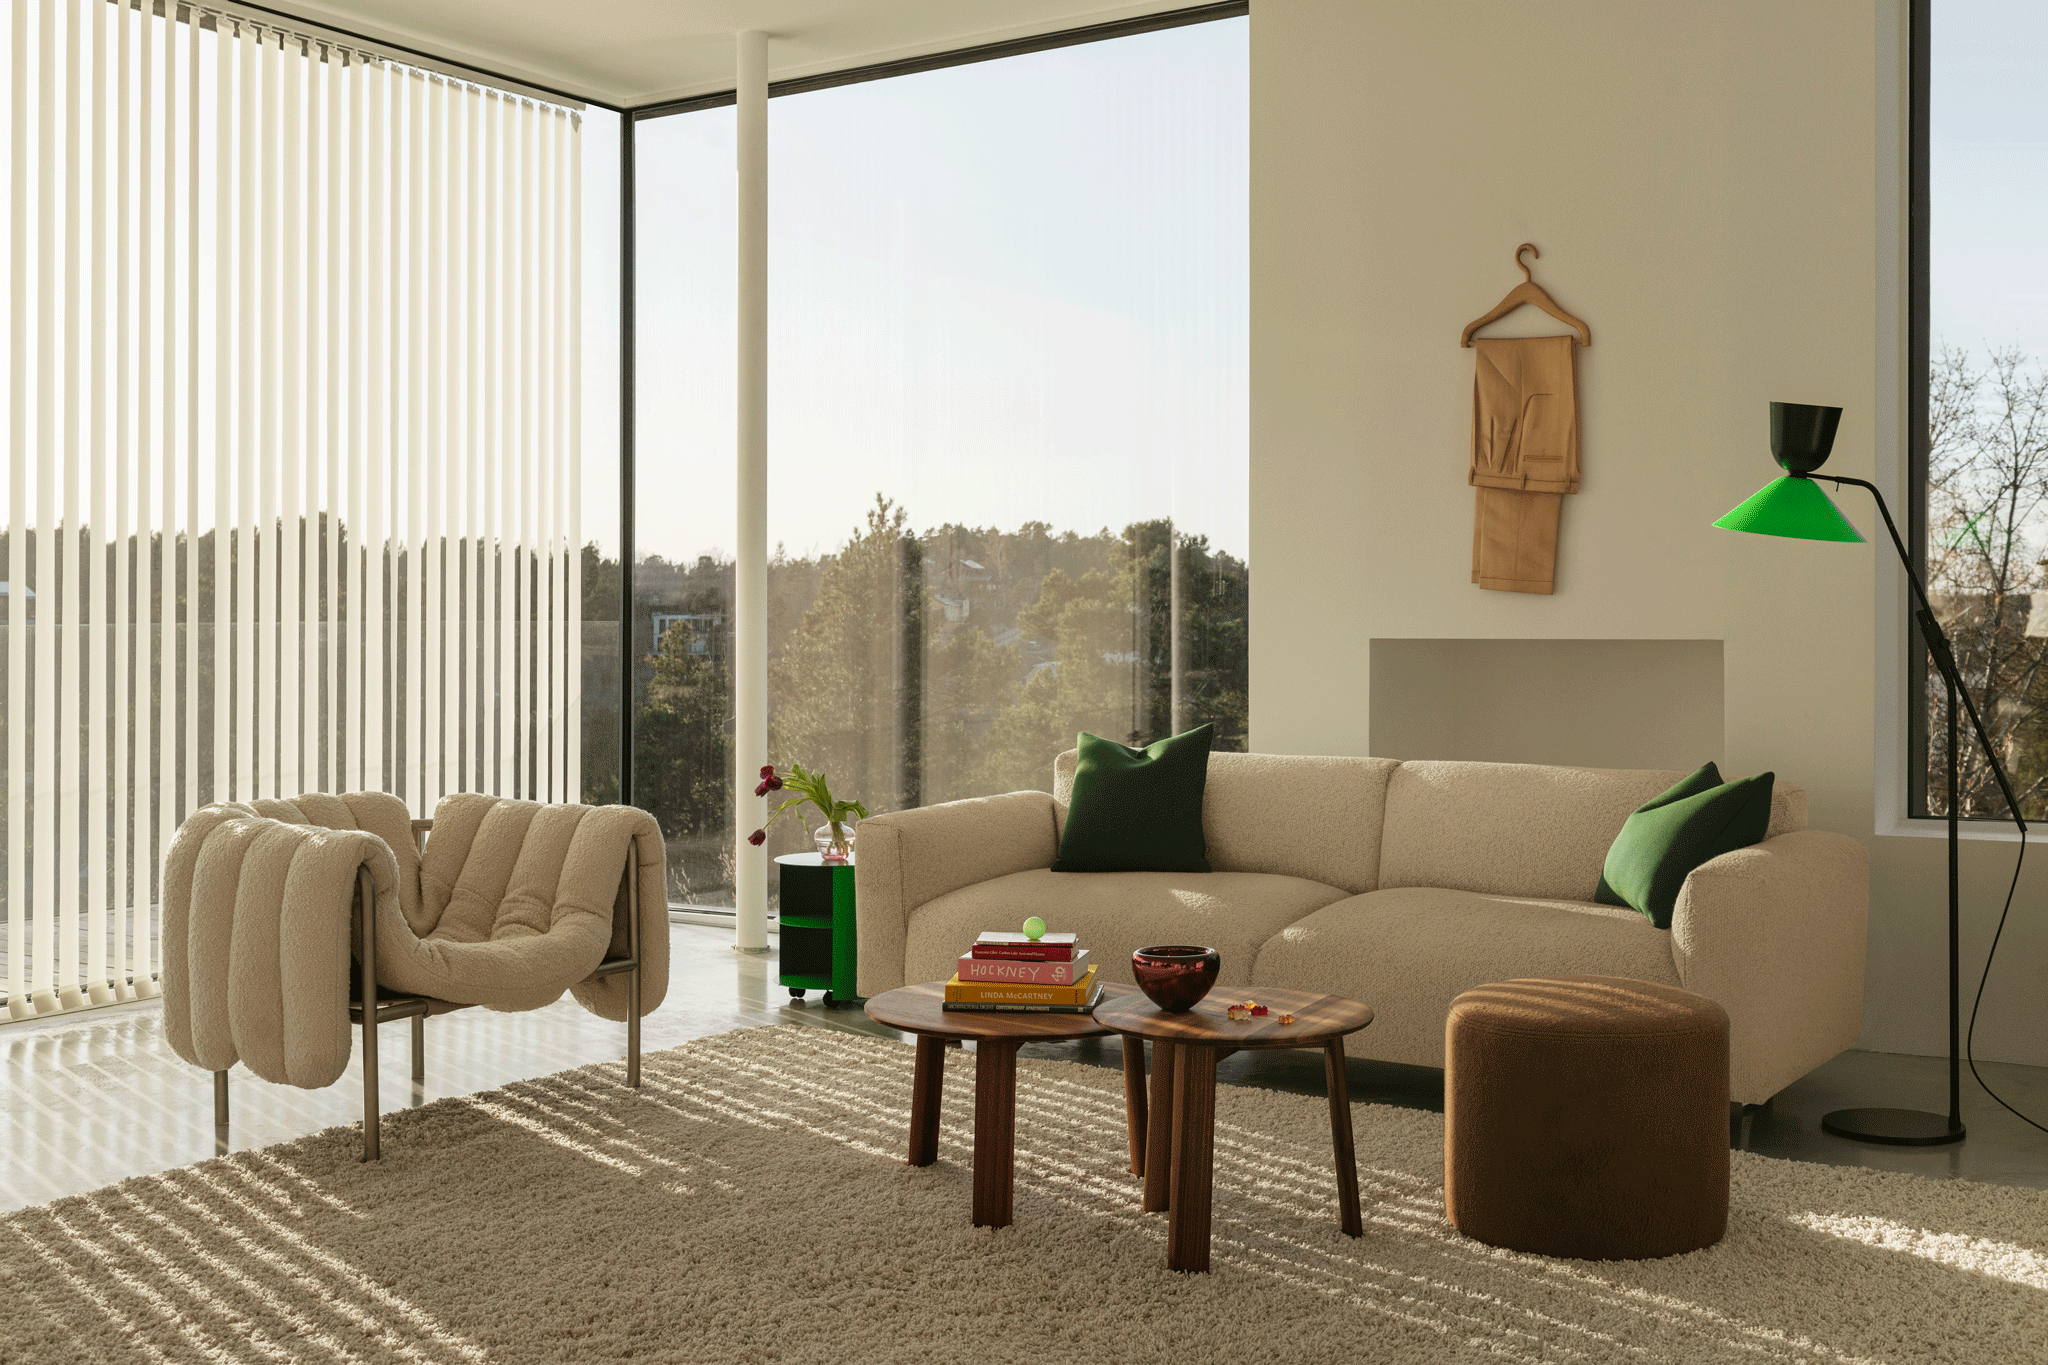 Hem - A living room scene featuring Puffy Lounge Chair, Bon Pouf, Alle Coffee Tables Set of 2, Koti 2-seater Sofa, Alphabeta Floor Lamp, and Neo Cushions.